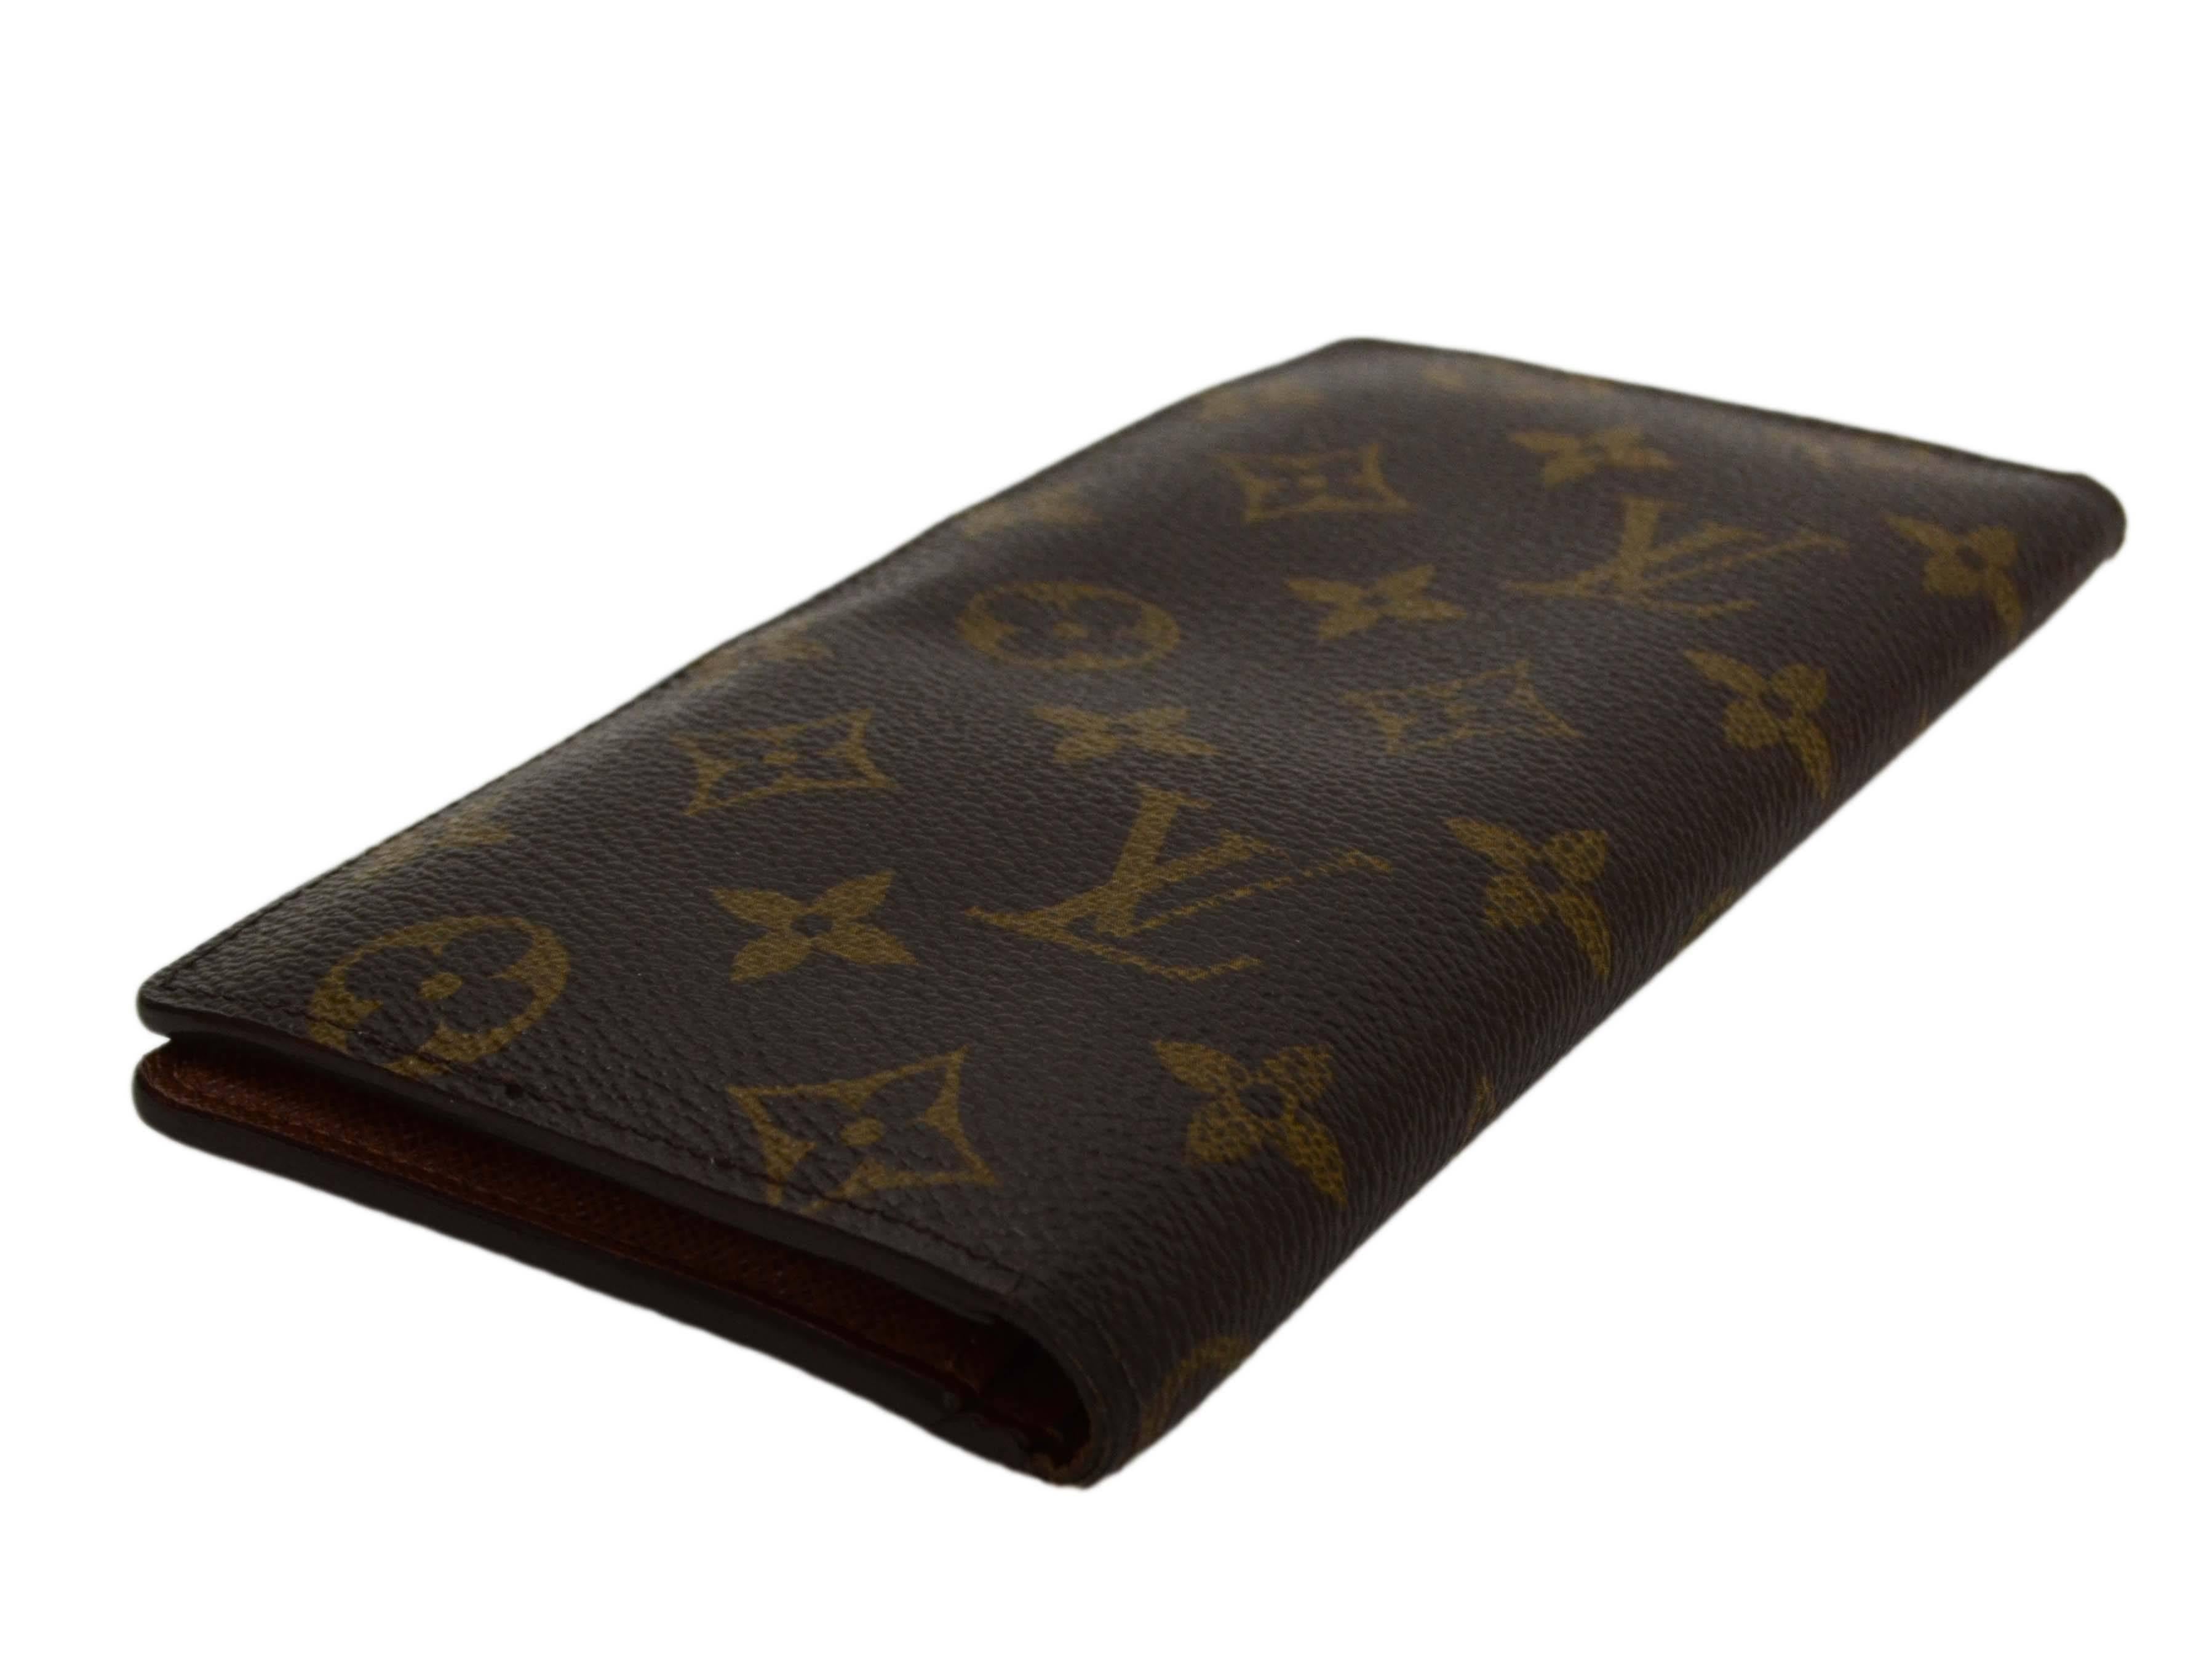 Louis Vuitton Monogram Canvas Vertical Open Wallet 
Made In: France
Year of Production: 2012
Color: Brown
Hardware: None
Materials: Coated canvas
Lining: Brown coated canvas
Closure/Opening: Bifold
Exterior Pockets: None
Interior Pockets: